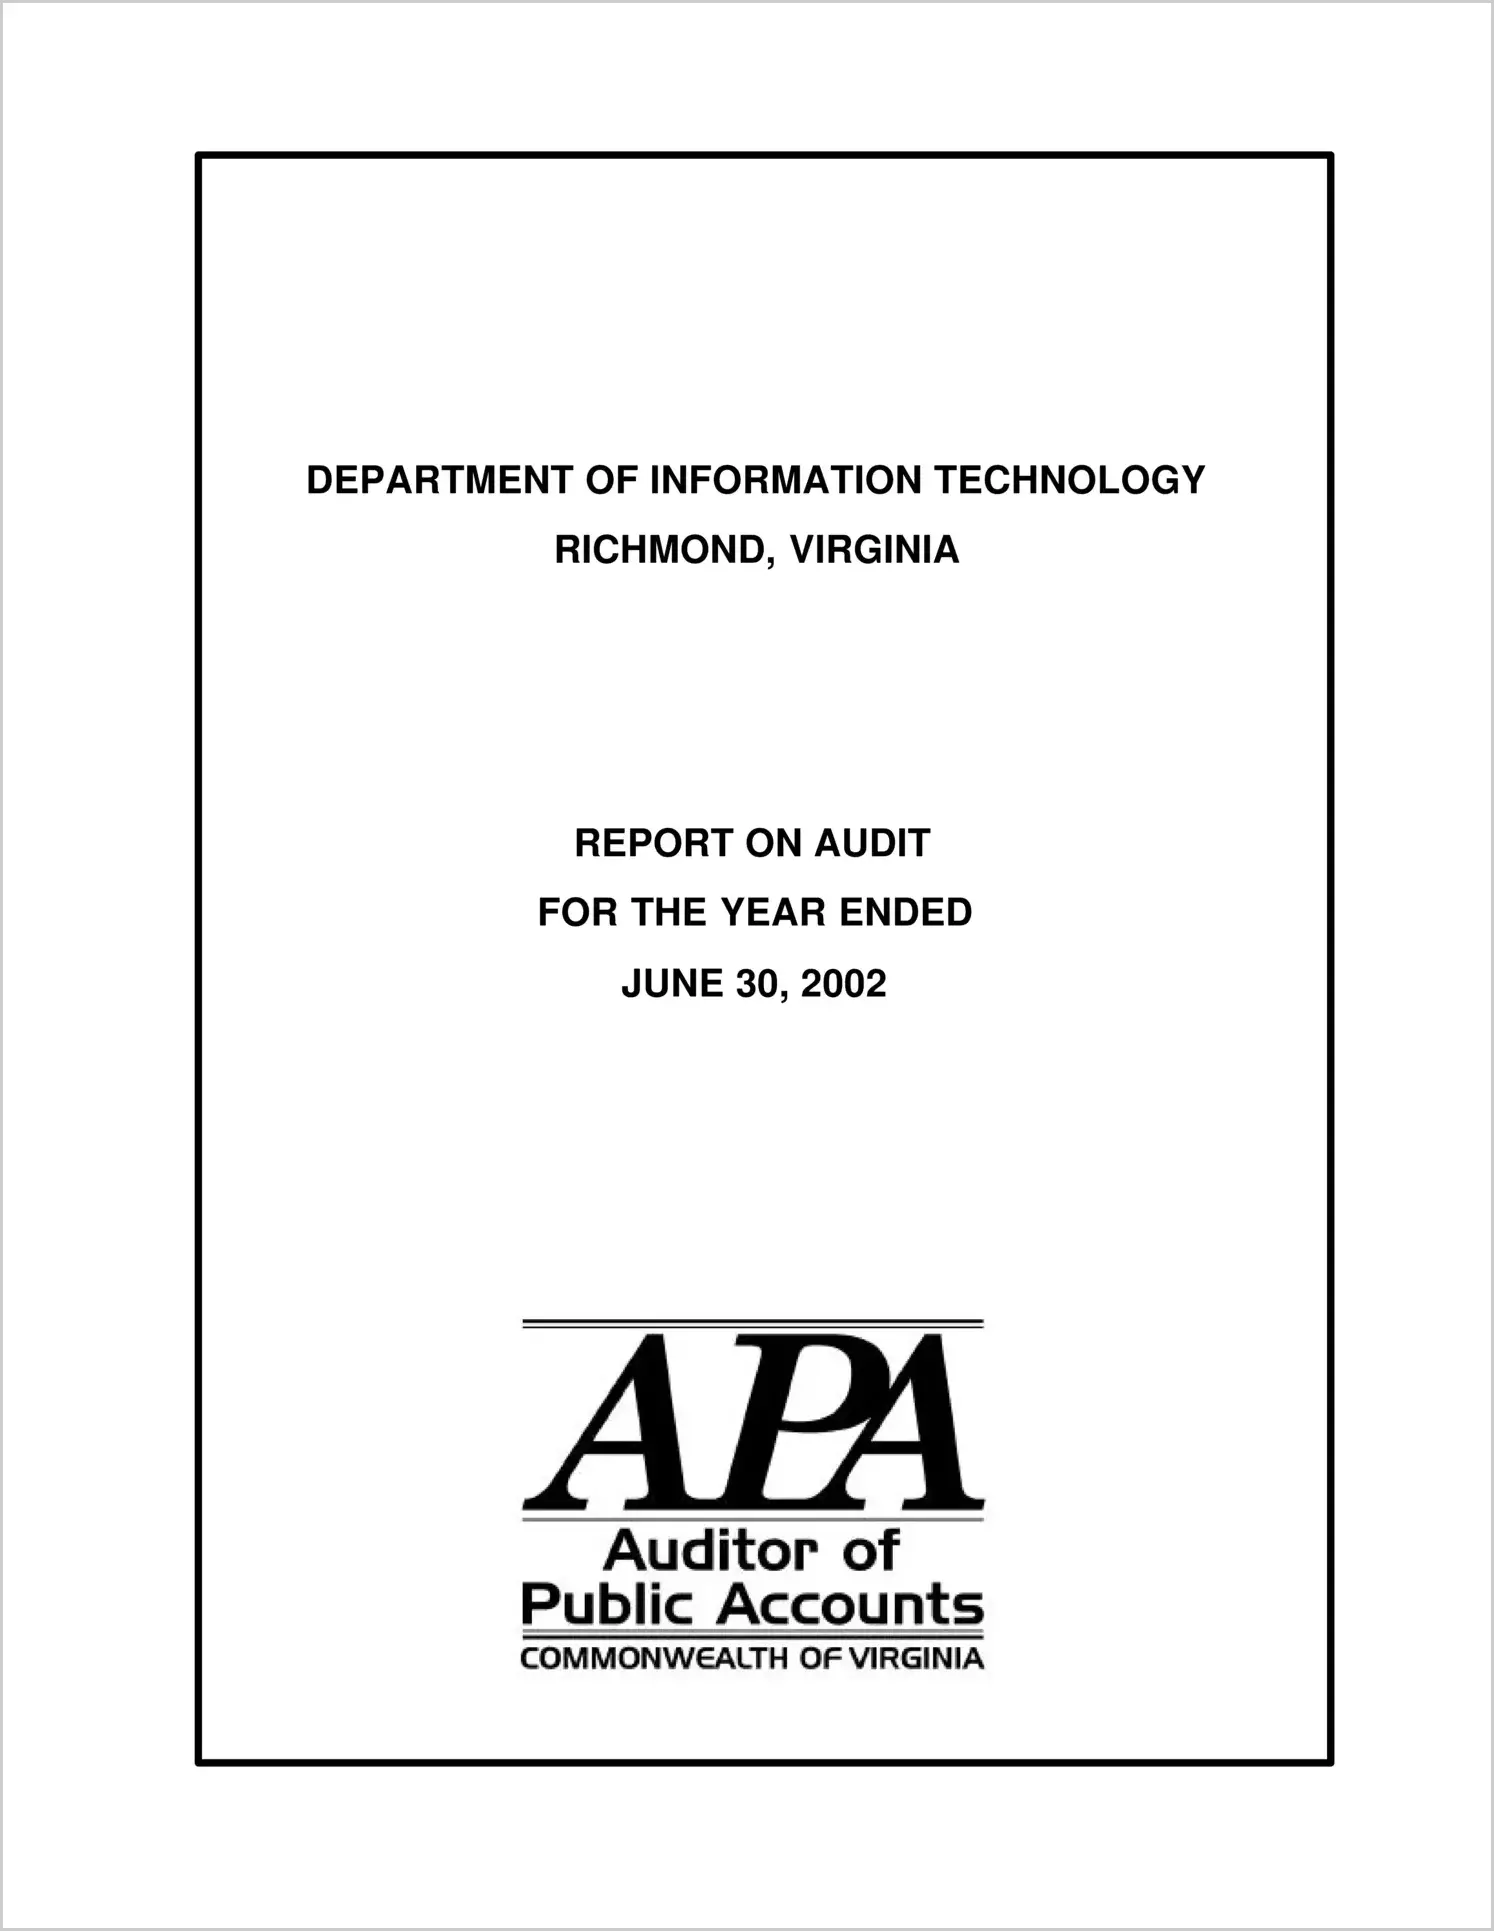 Department of Information Technology for the year ended June 30, 2002